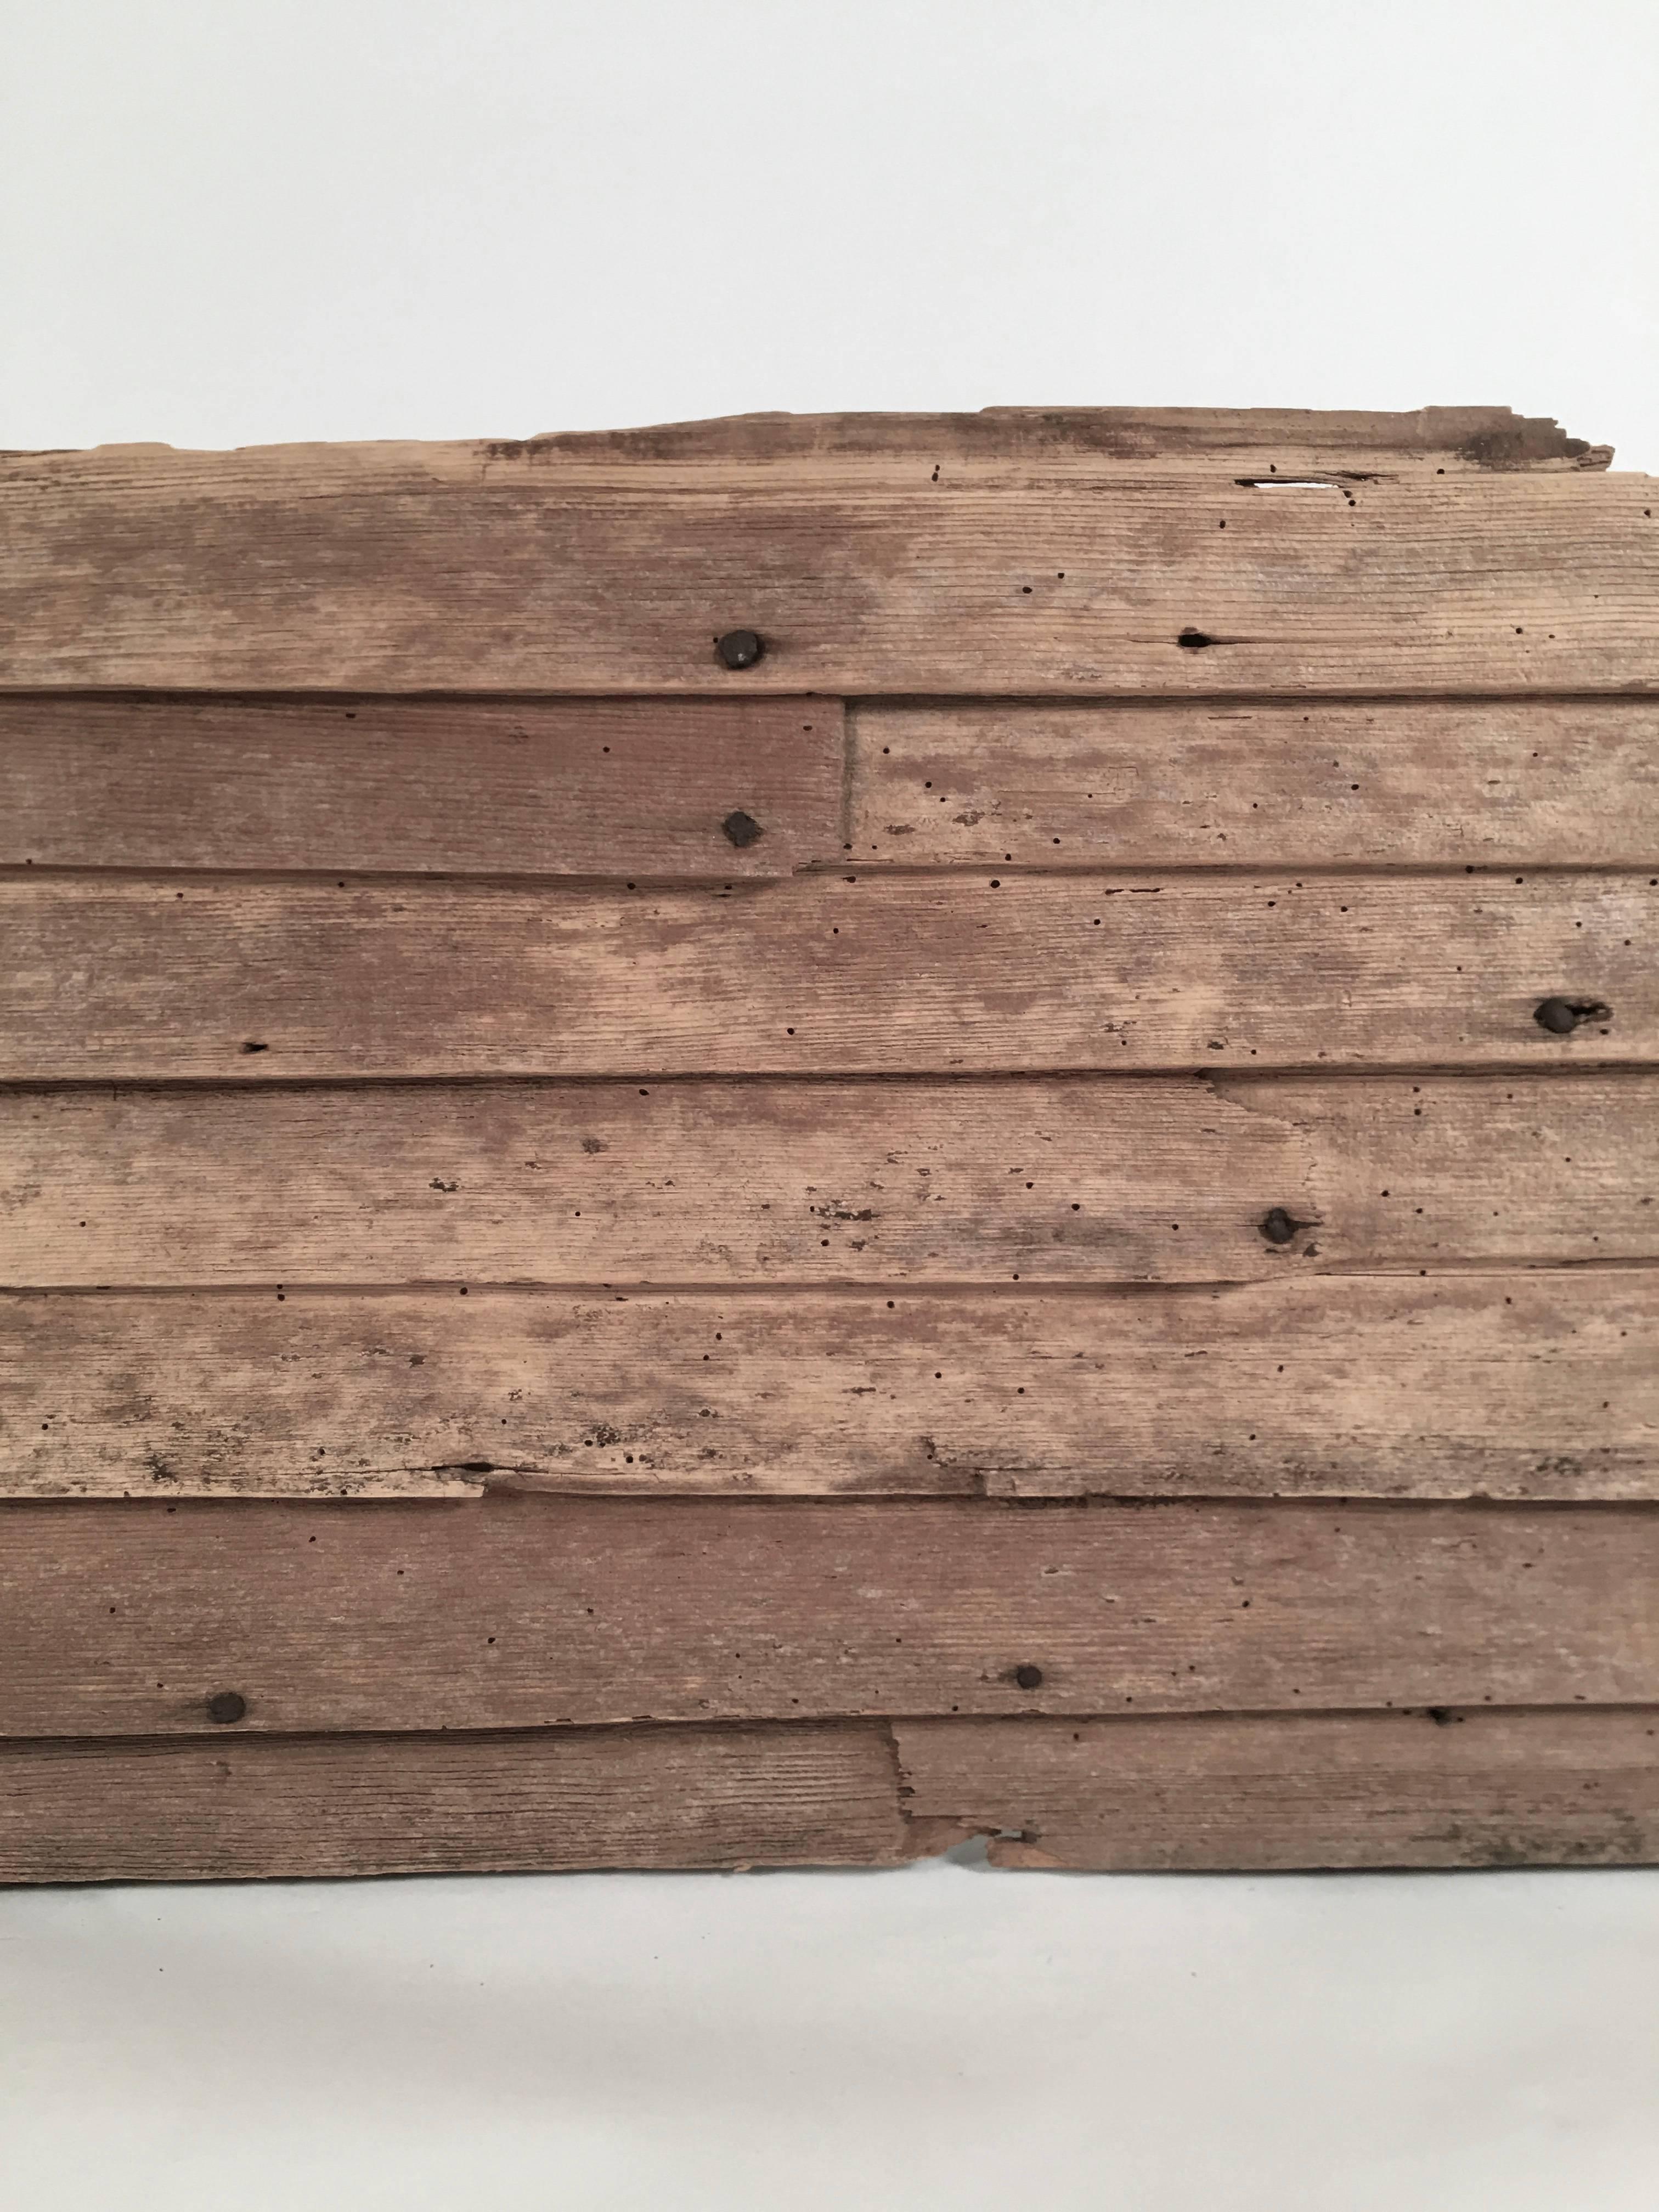 A fragment of 18th century wood clapboard siding with hand cut nails, the rectangular overlapping boards with wonderful age and patina, from a Hampton New Hampshire farm house, circa 1725. The square cut-out hole wold have been for an old pipe or